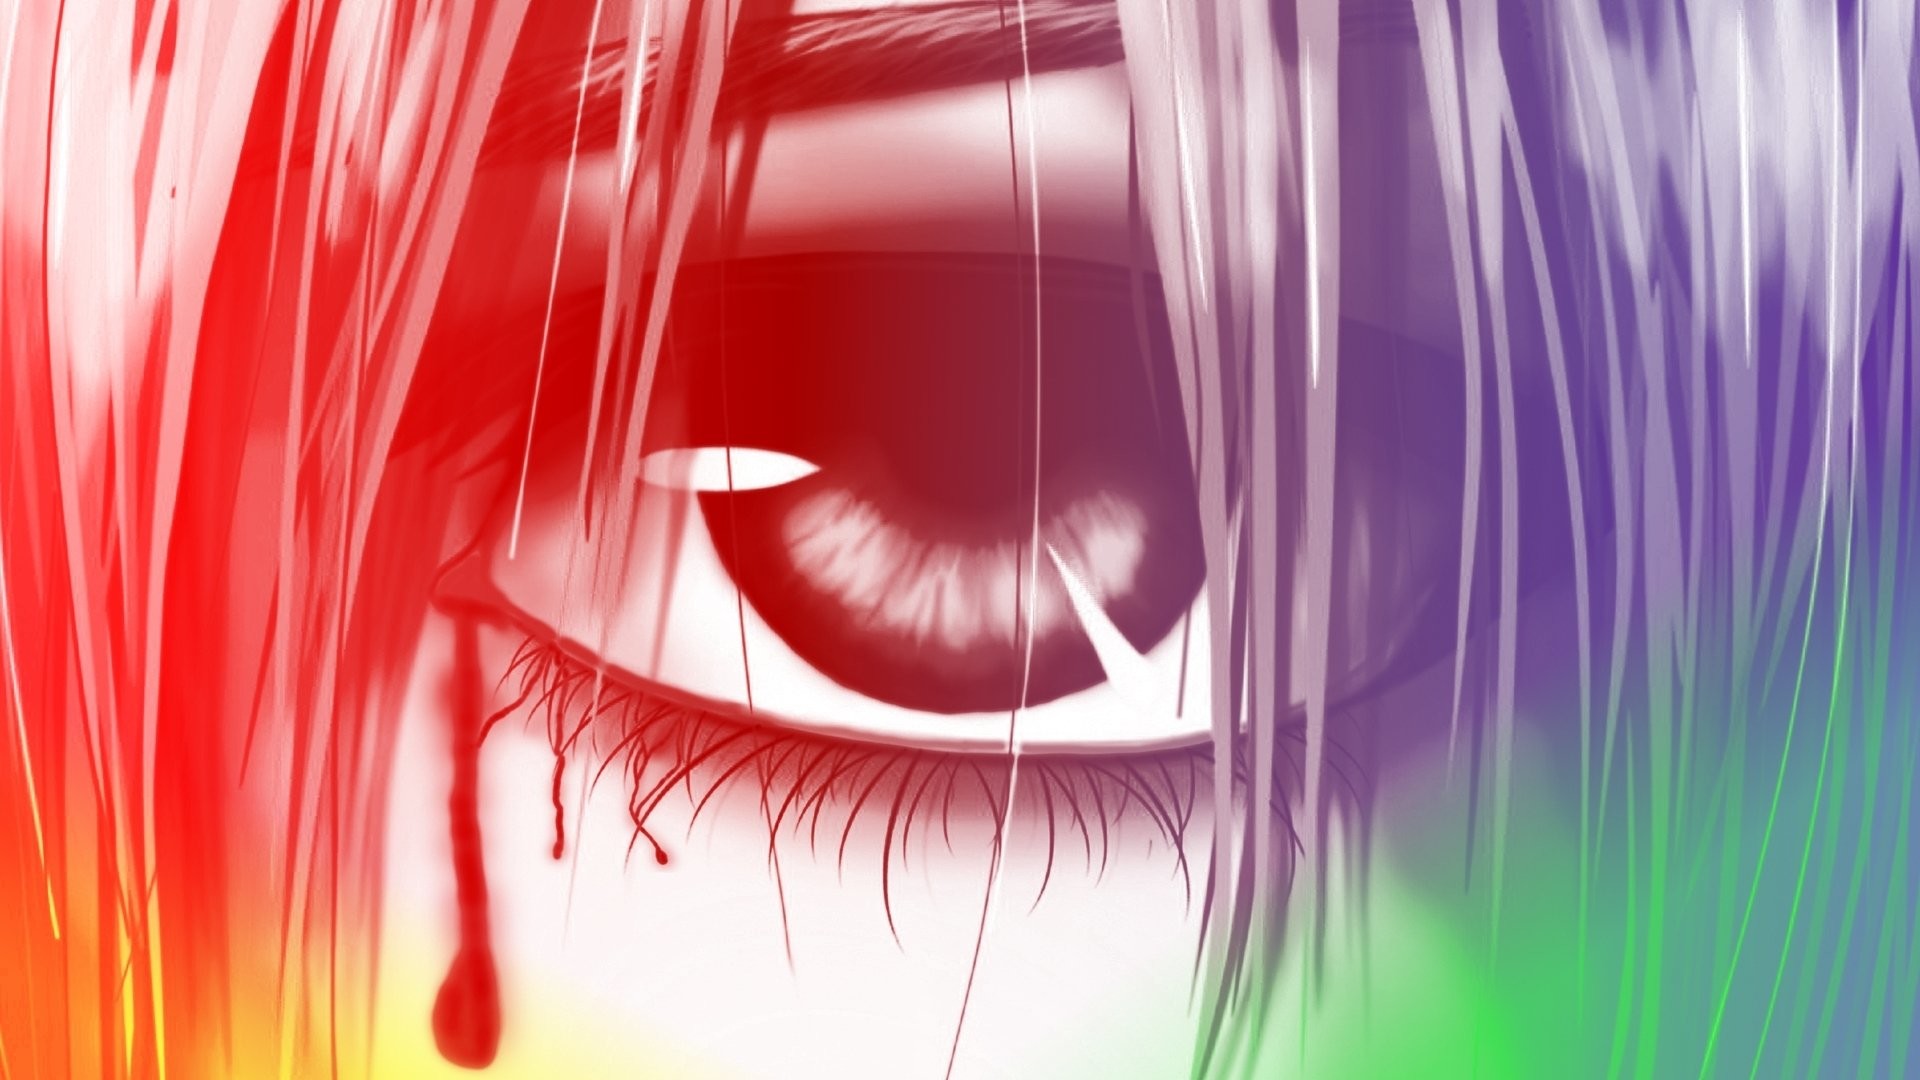 1920x1080 Anime - Elfen Lied Anime Bright Colorful Lucy (Elfen Lied) Wallpaper